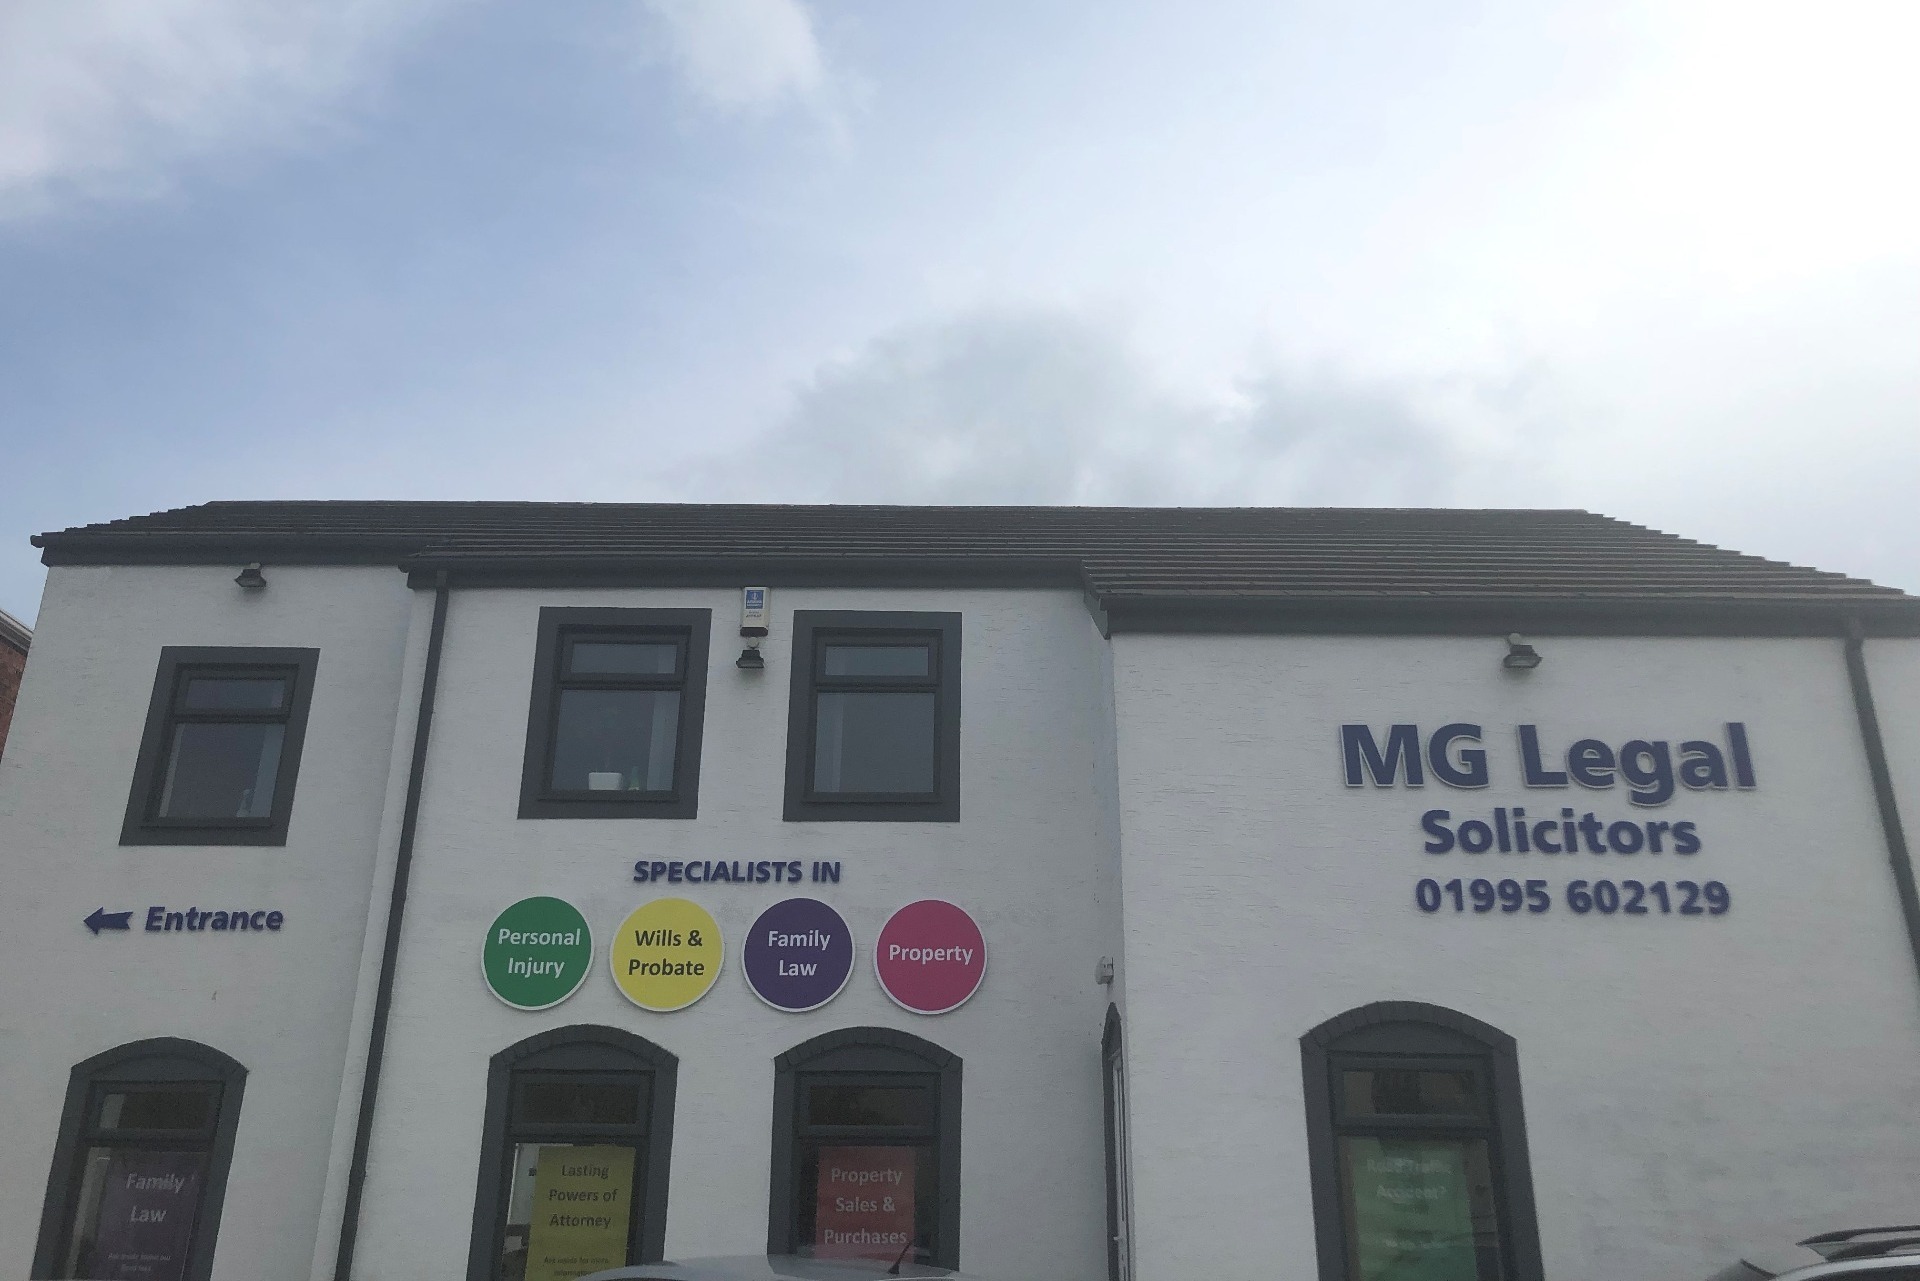 Our office in Garstang, home of our Solicitors in Garstang, at 7 Pringle Court, Garstang, Preston, PR3 1LN.